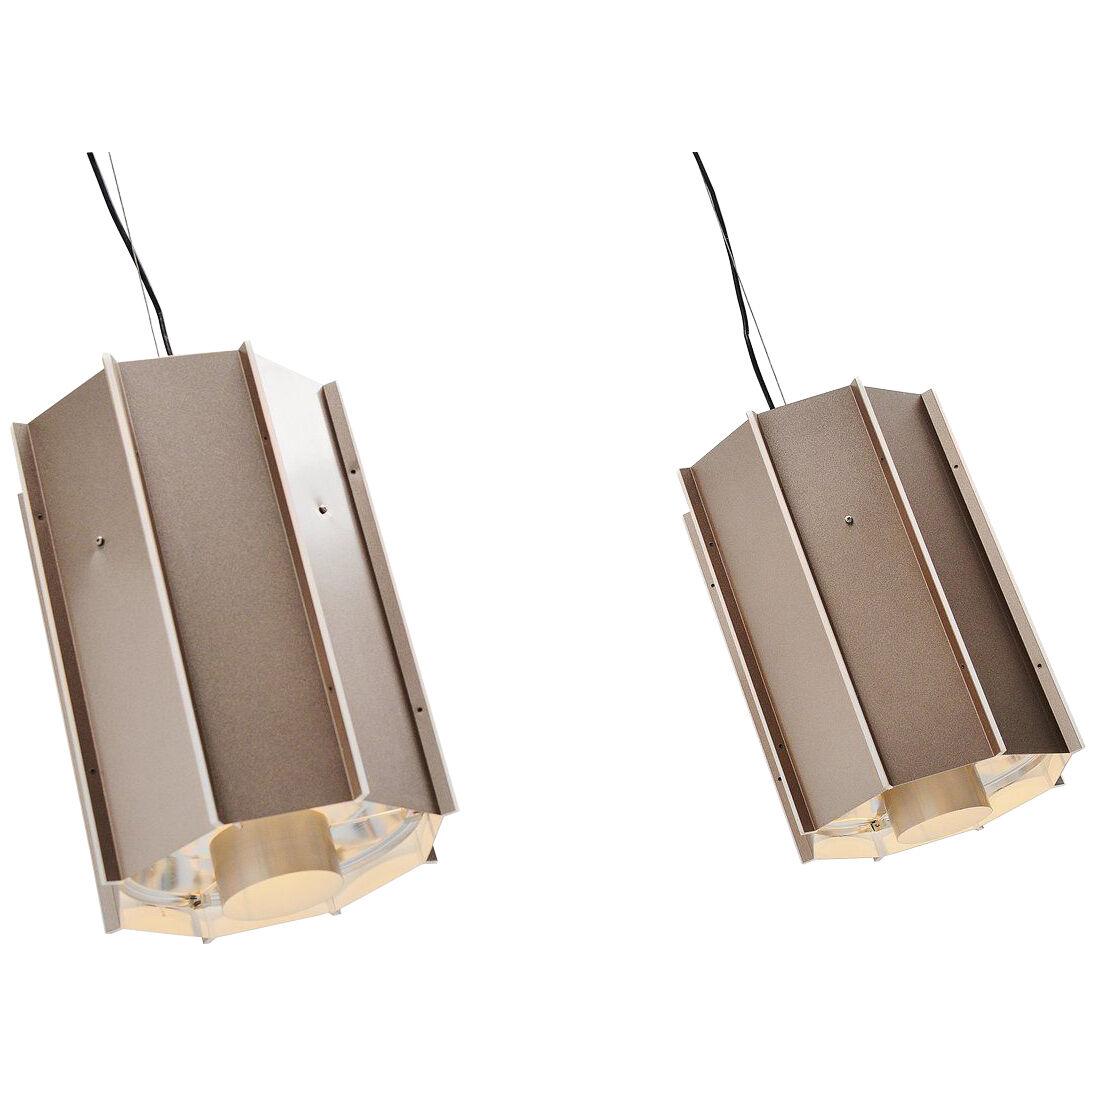 Raak Amsterdam industrial ceiling lamps The Netherlands 1970